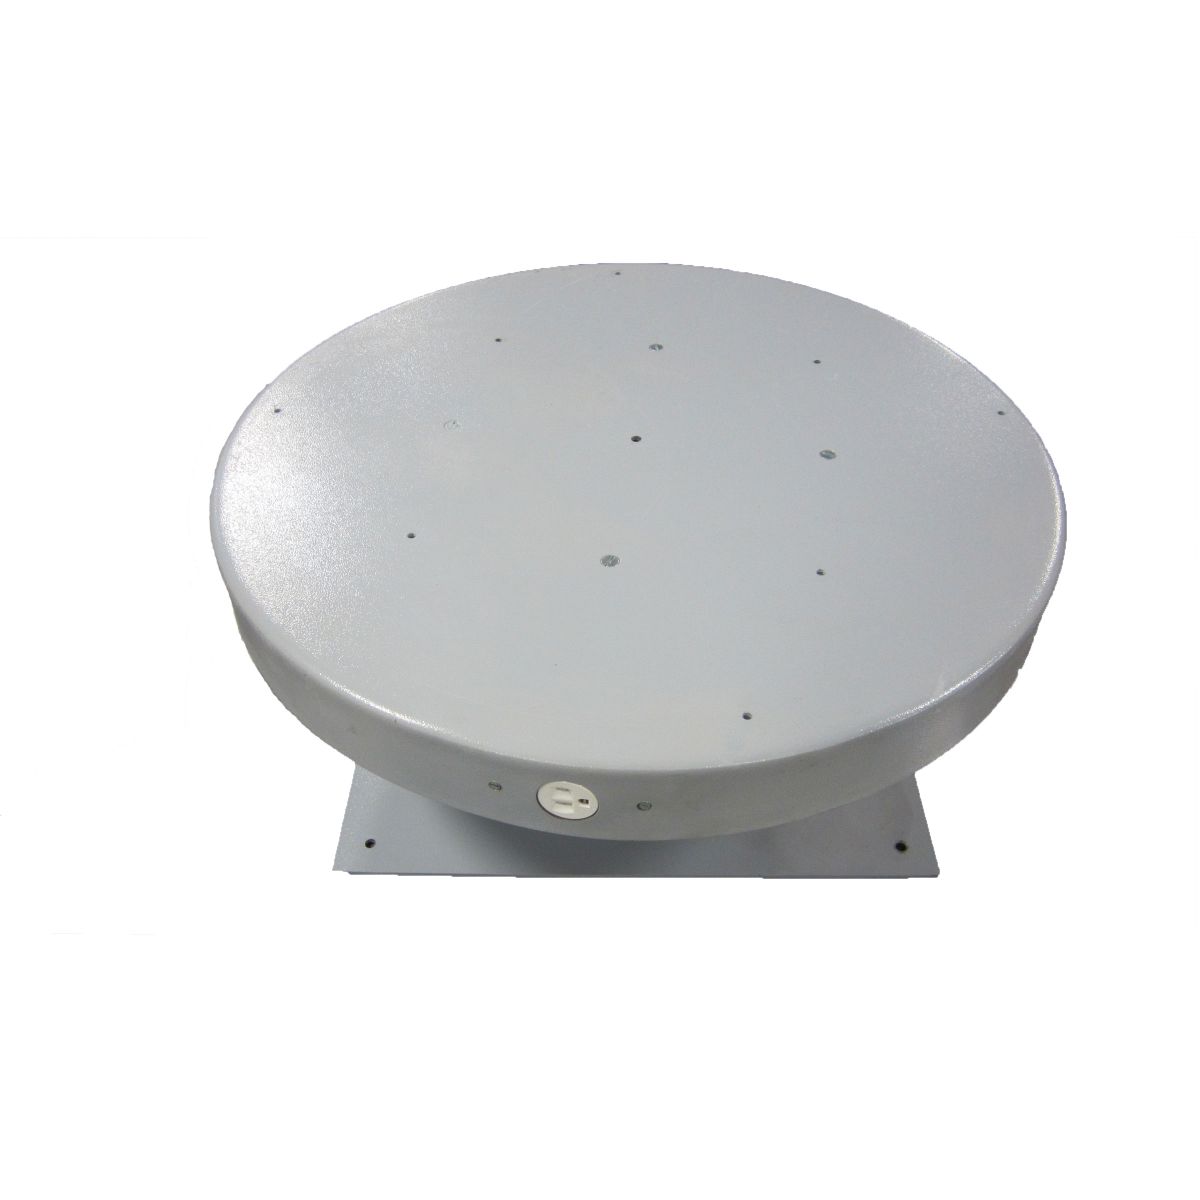 Ultra Heavy Duty Turntable - 24" Round - 750 Pounds